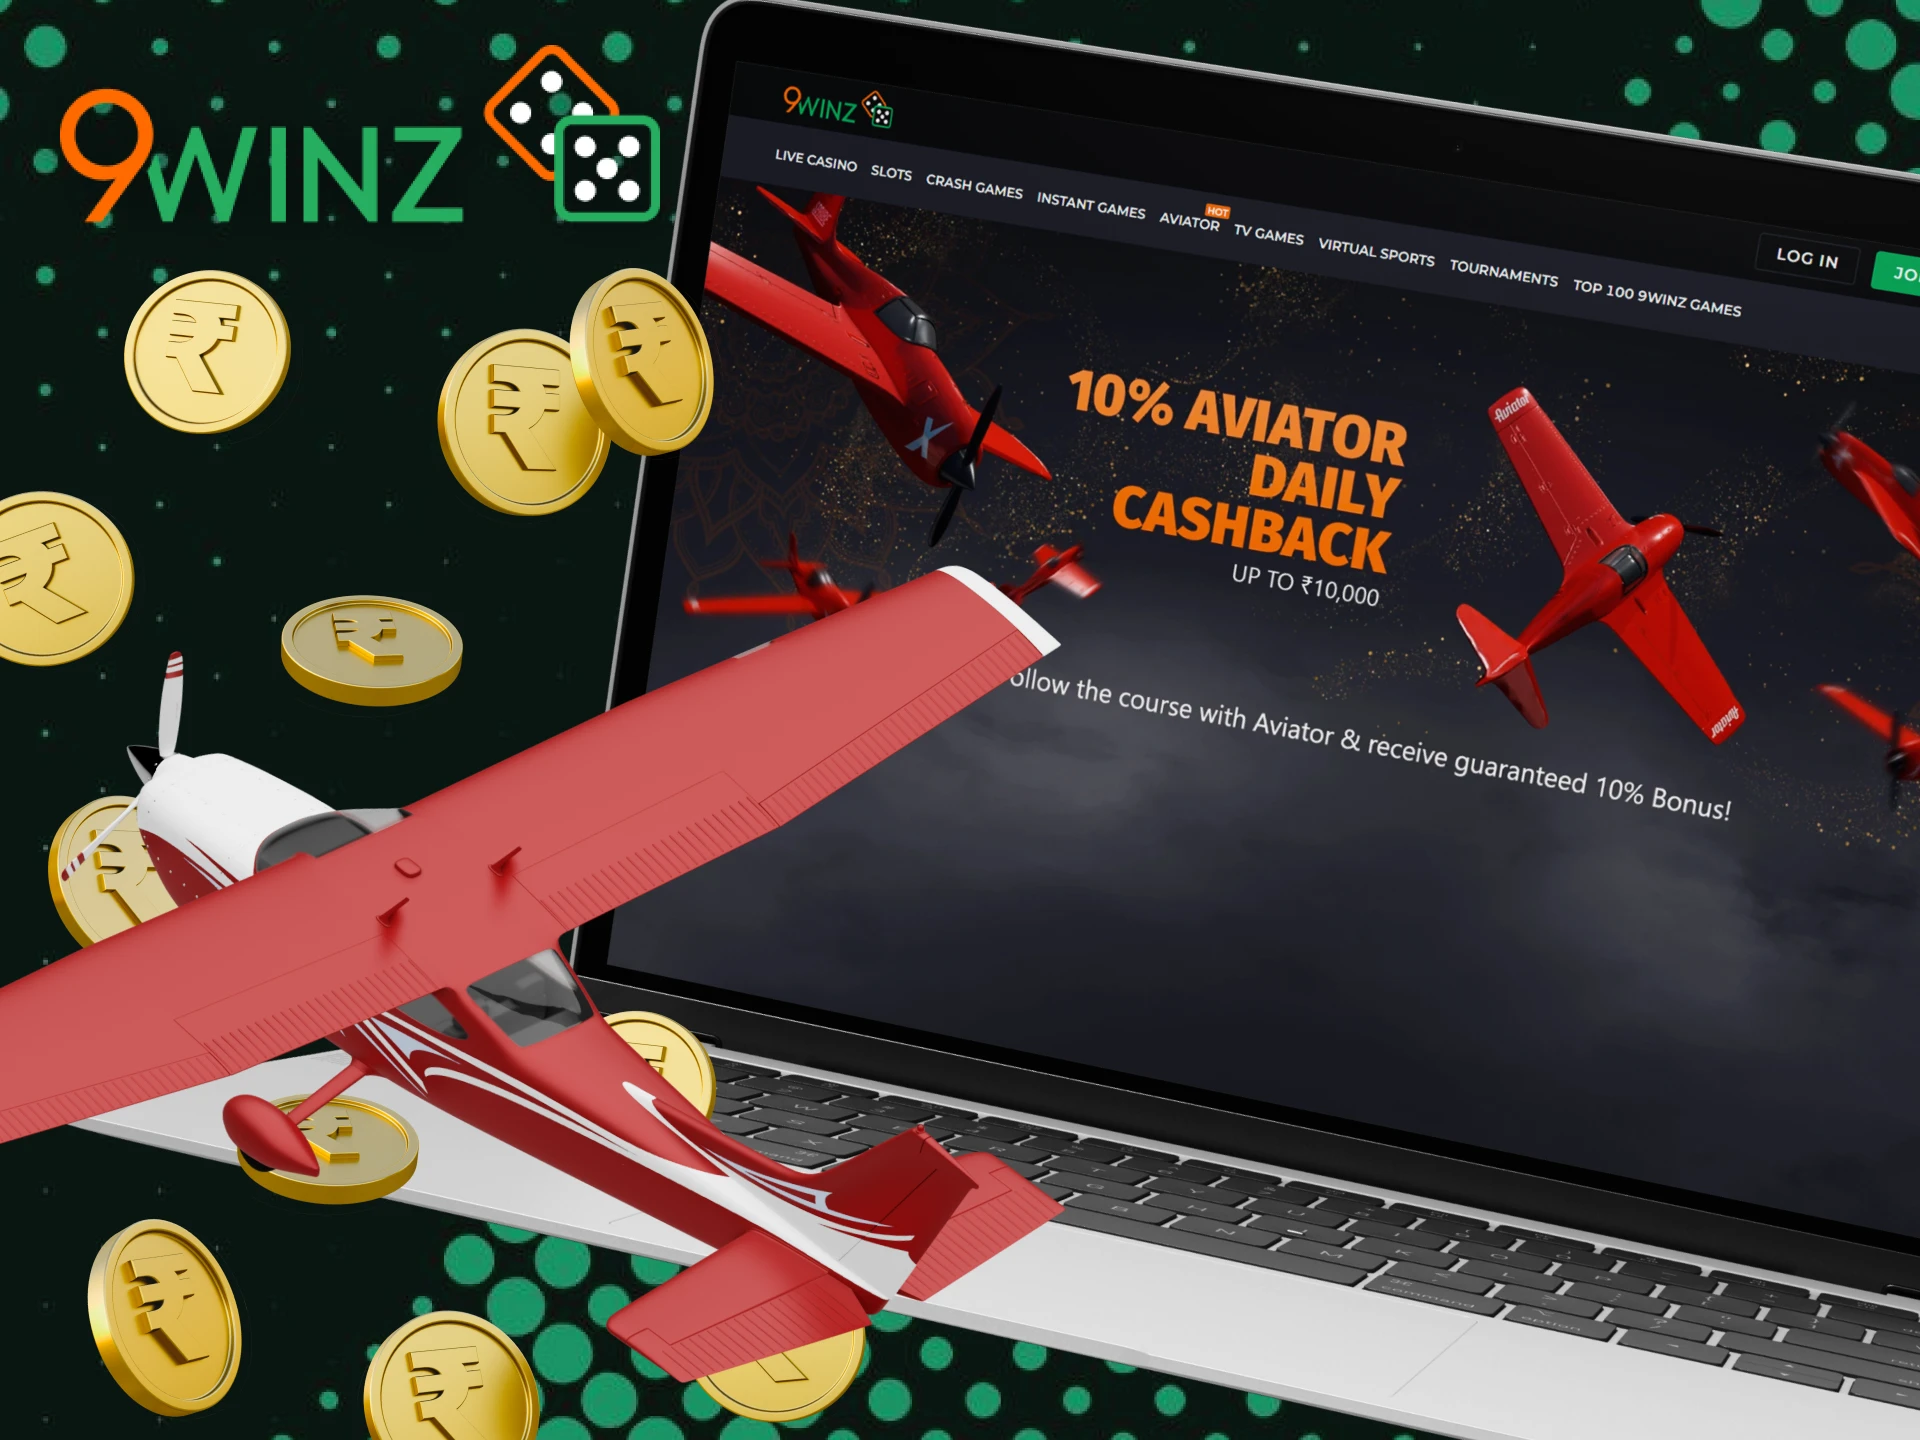 Play the Aviator game and get cashback at 9Winz Casino.